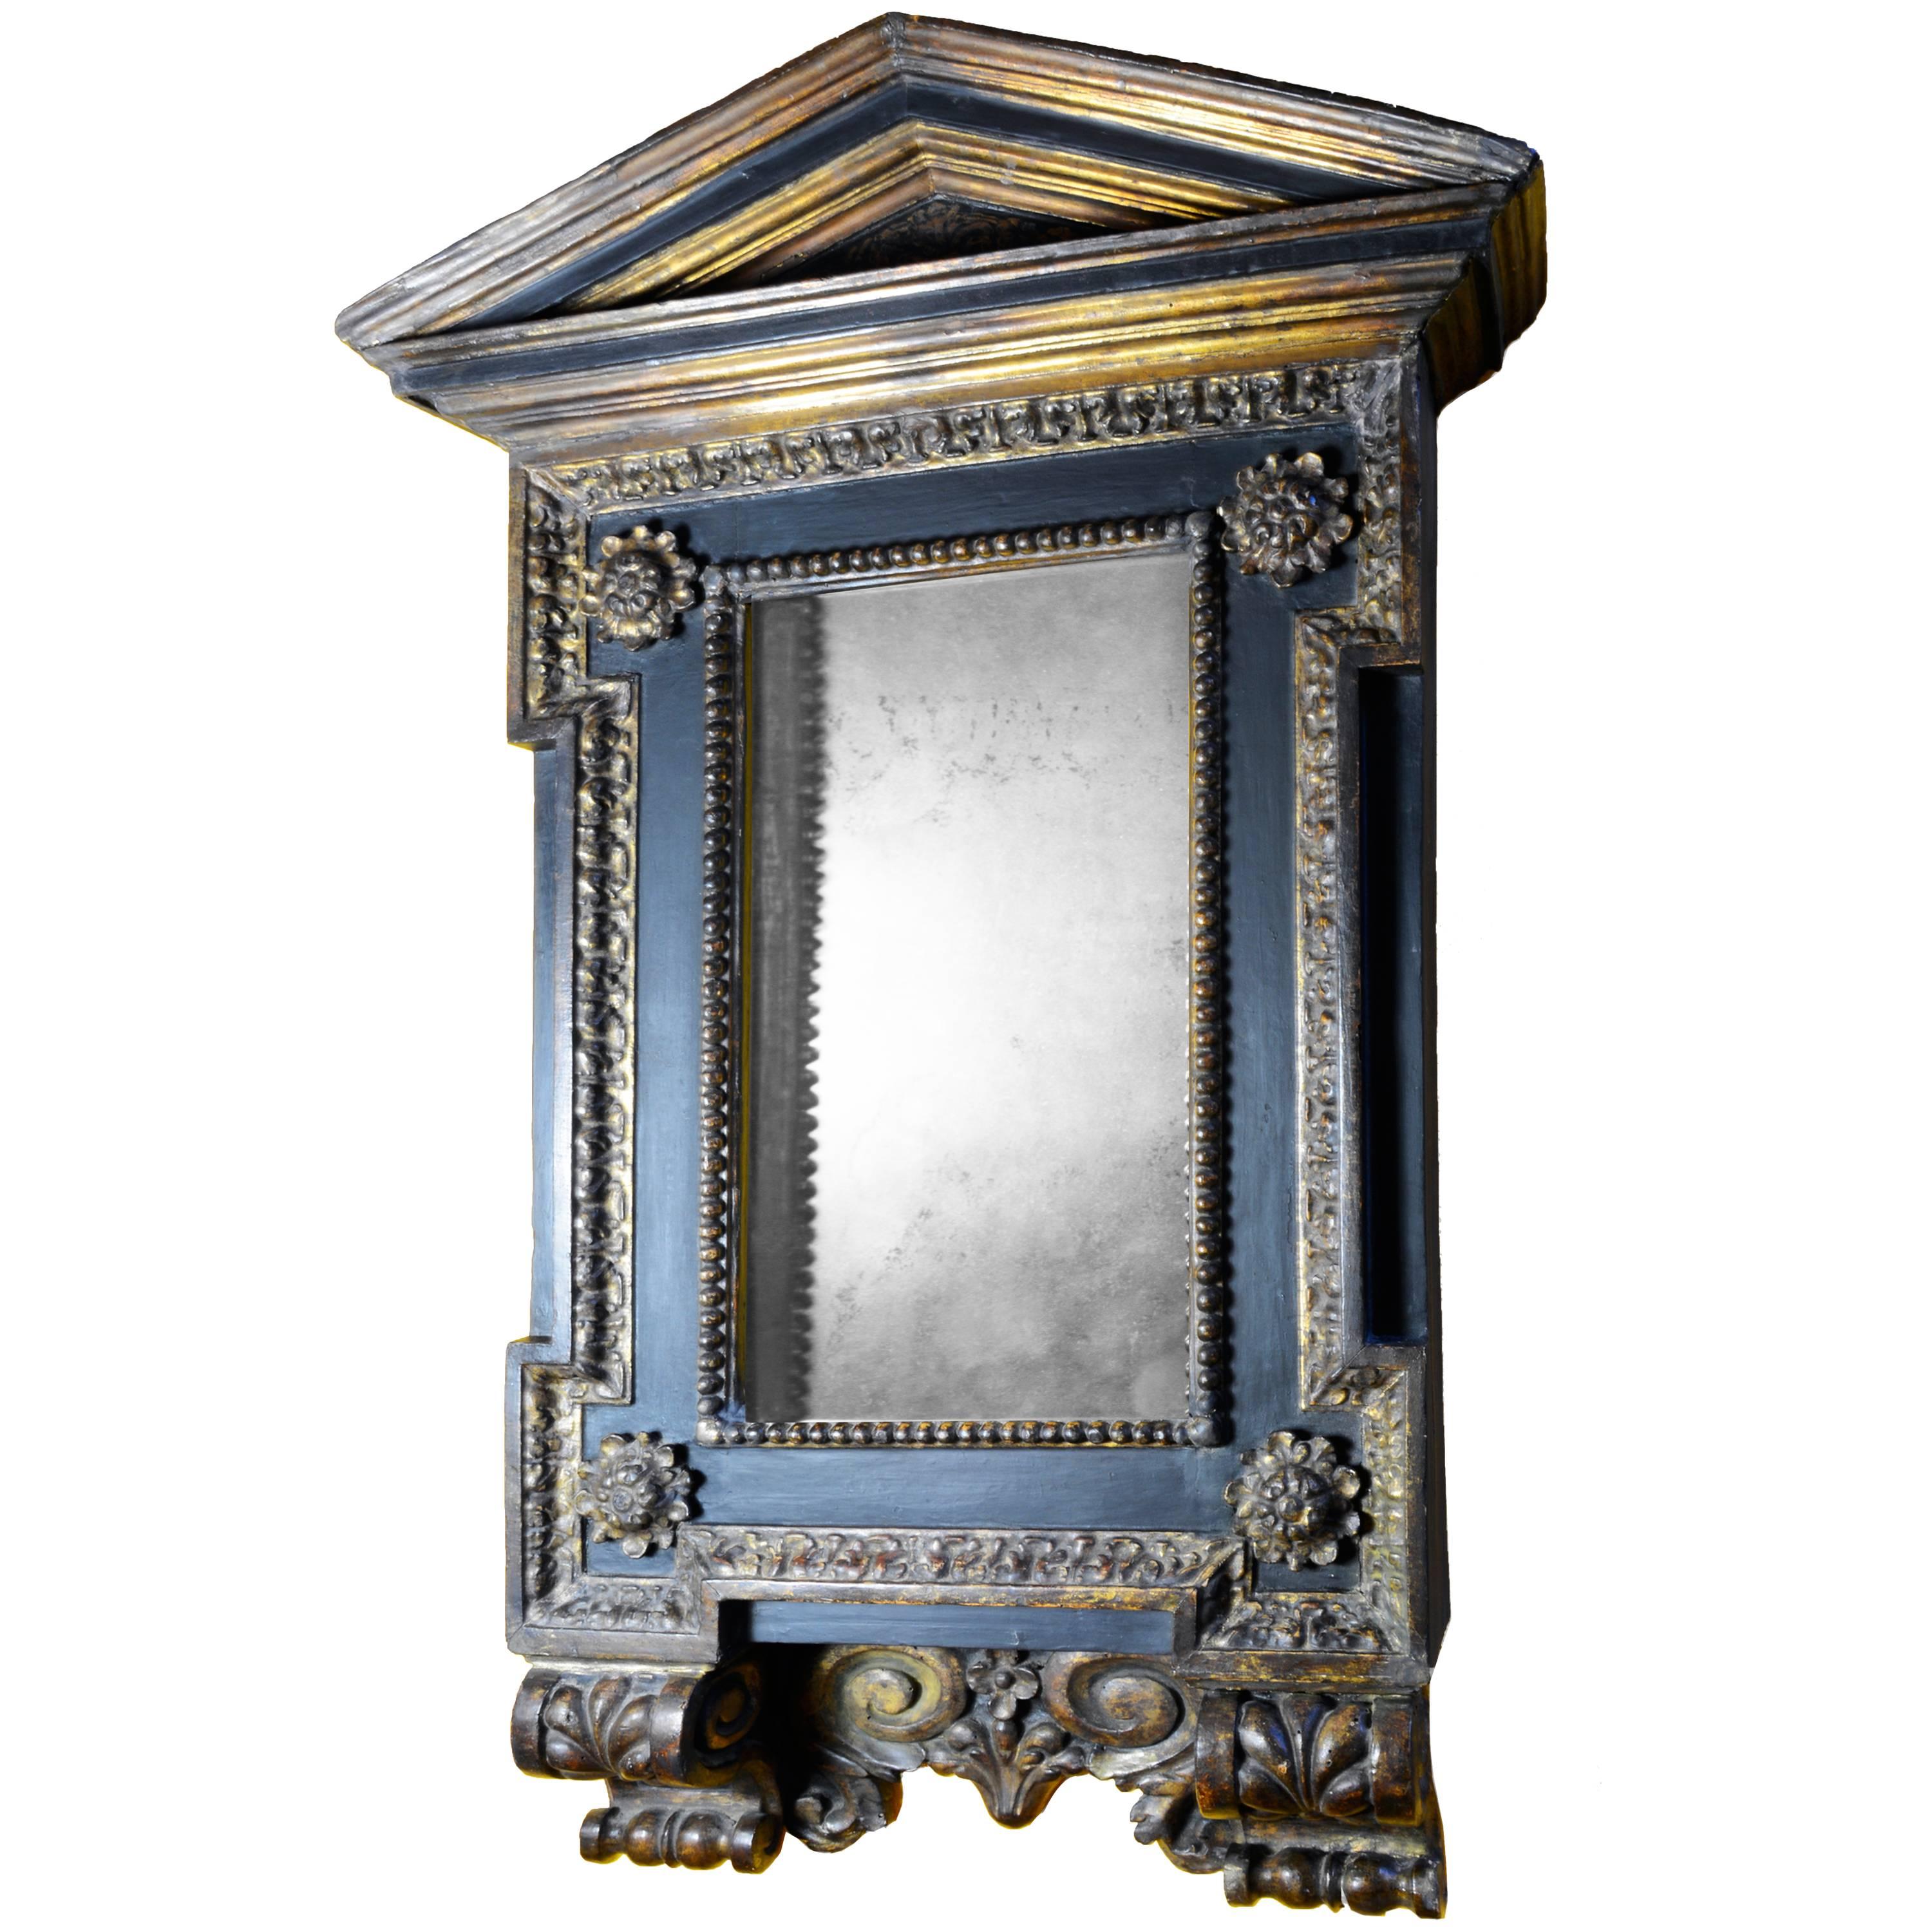 Mannerist Italian Wood Tabernacle Mirror from the Collection of David Abbato For Sale